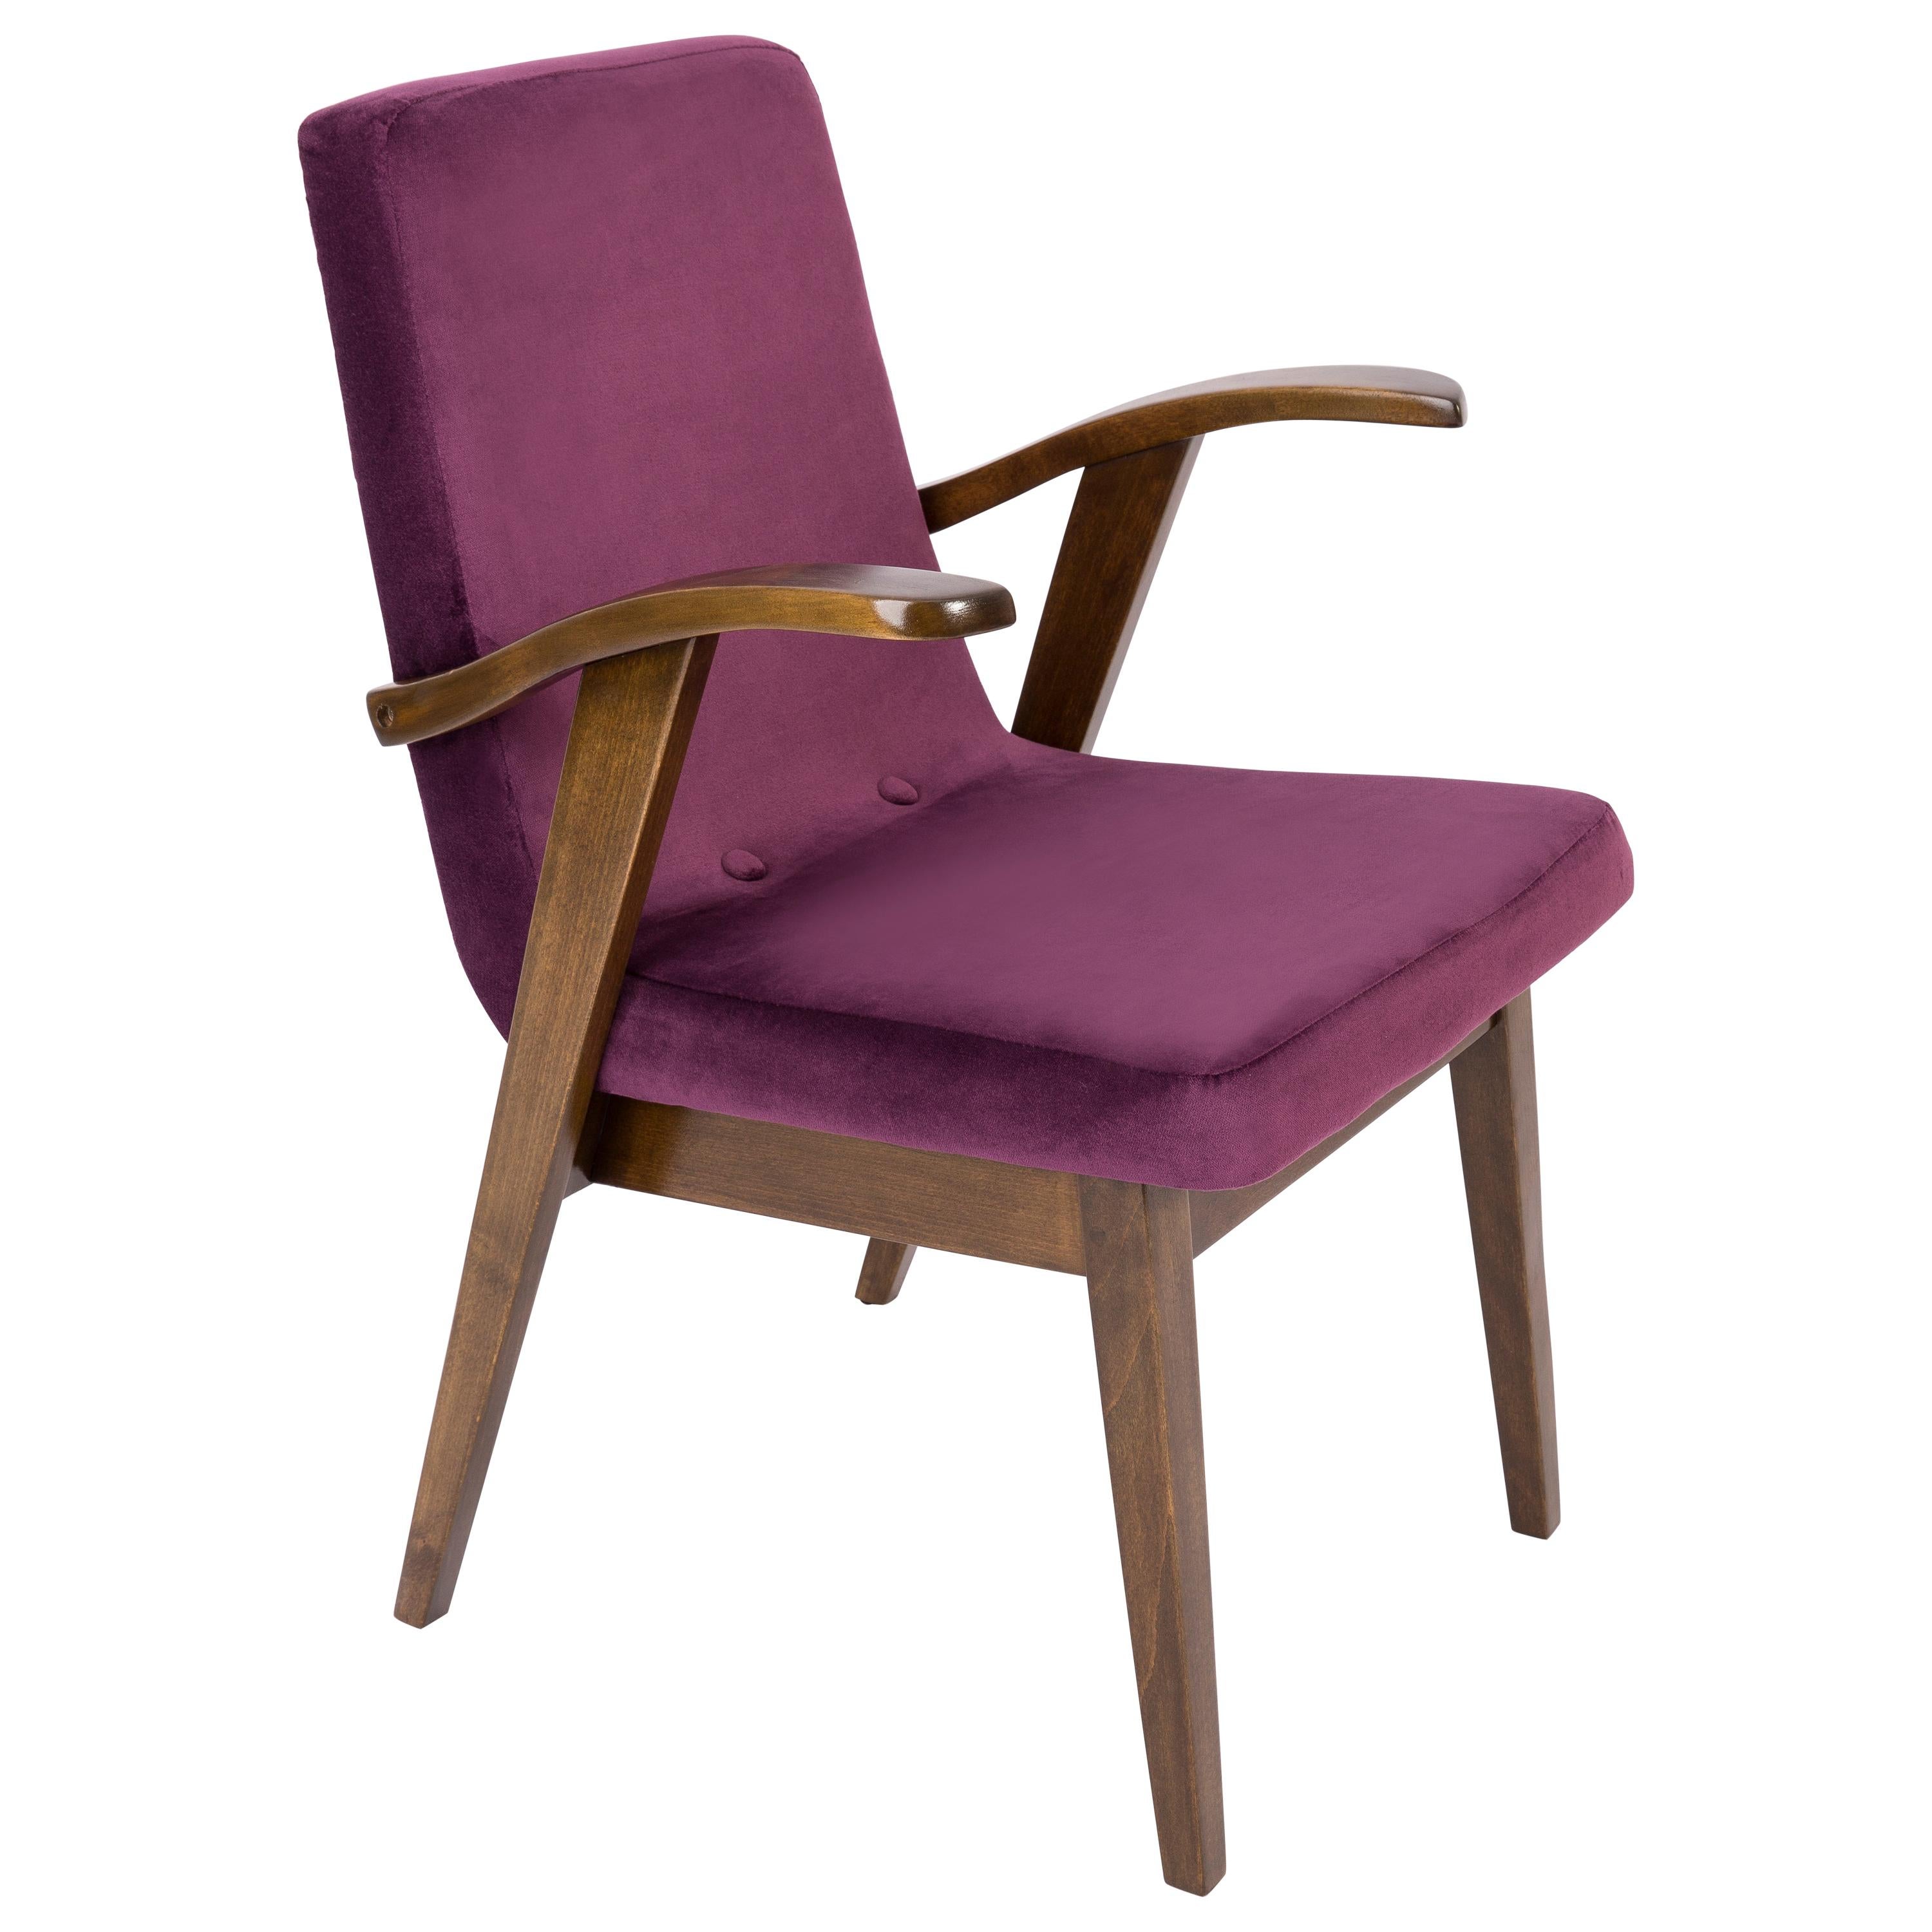 20th Century Vintage Plum Violet Armchair by Mieczyslaw Puchala, 1960s For Sale